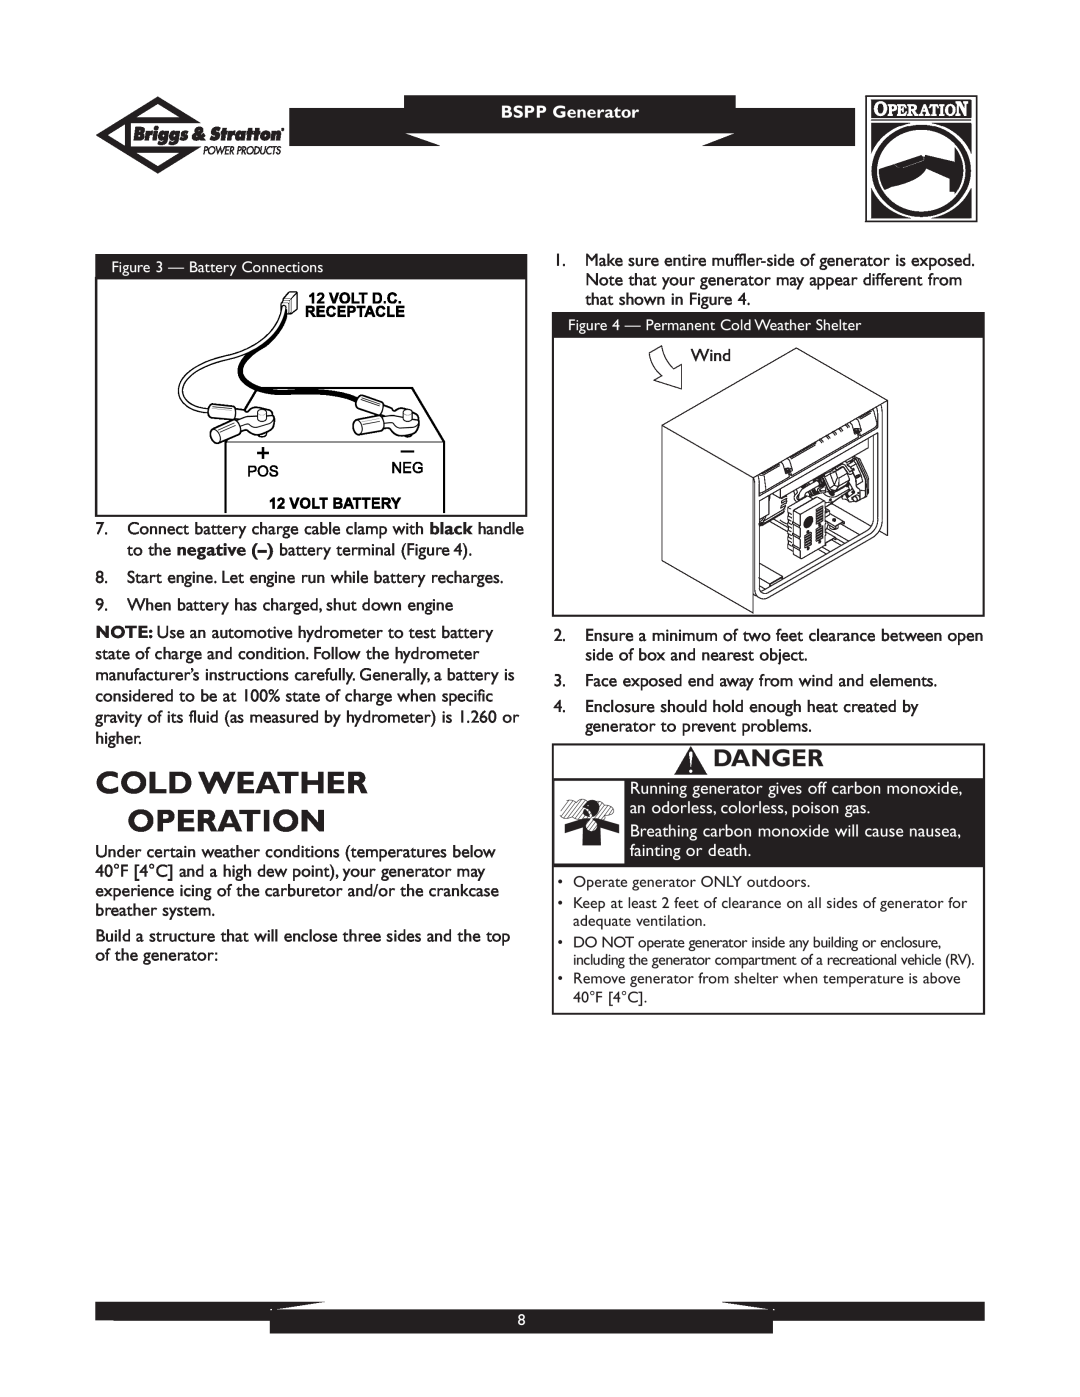 Briggs & Stratton PRO6500 01933, PRO4000 01932 owner manual Cold Weather Operation, Danger, BSPP Generator 